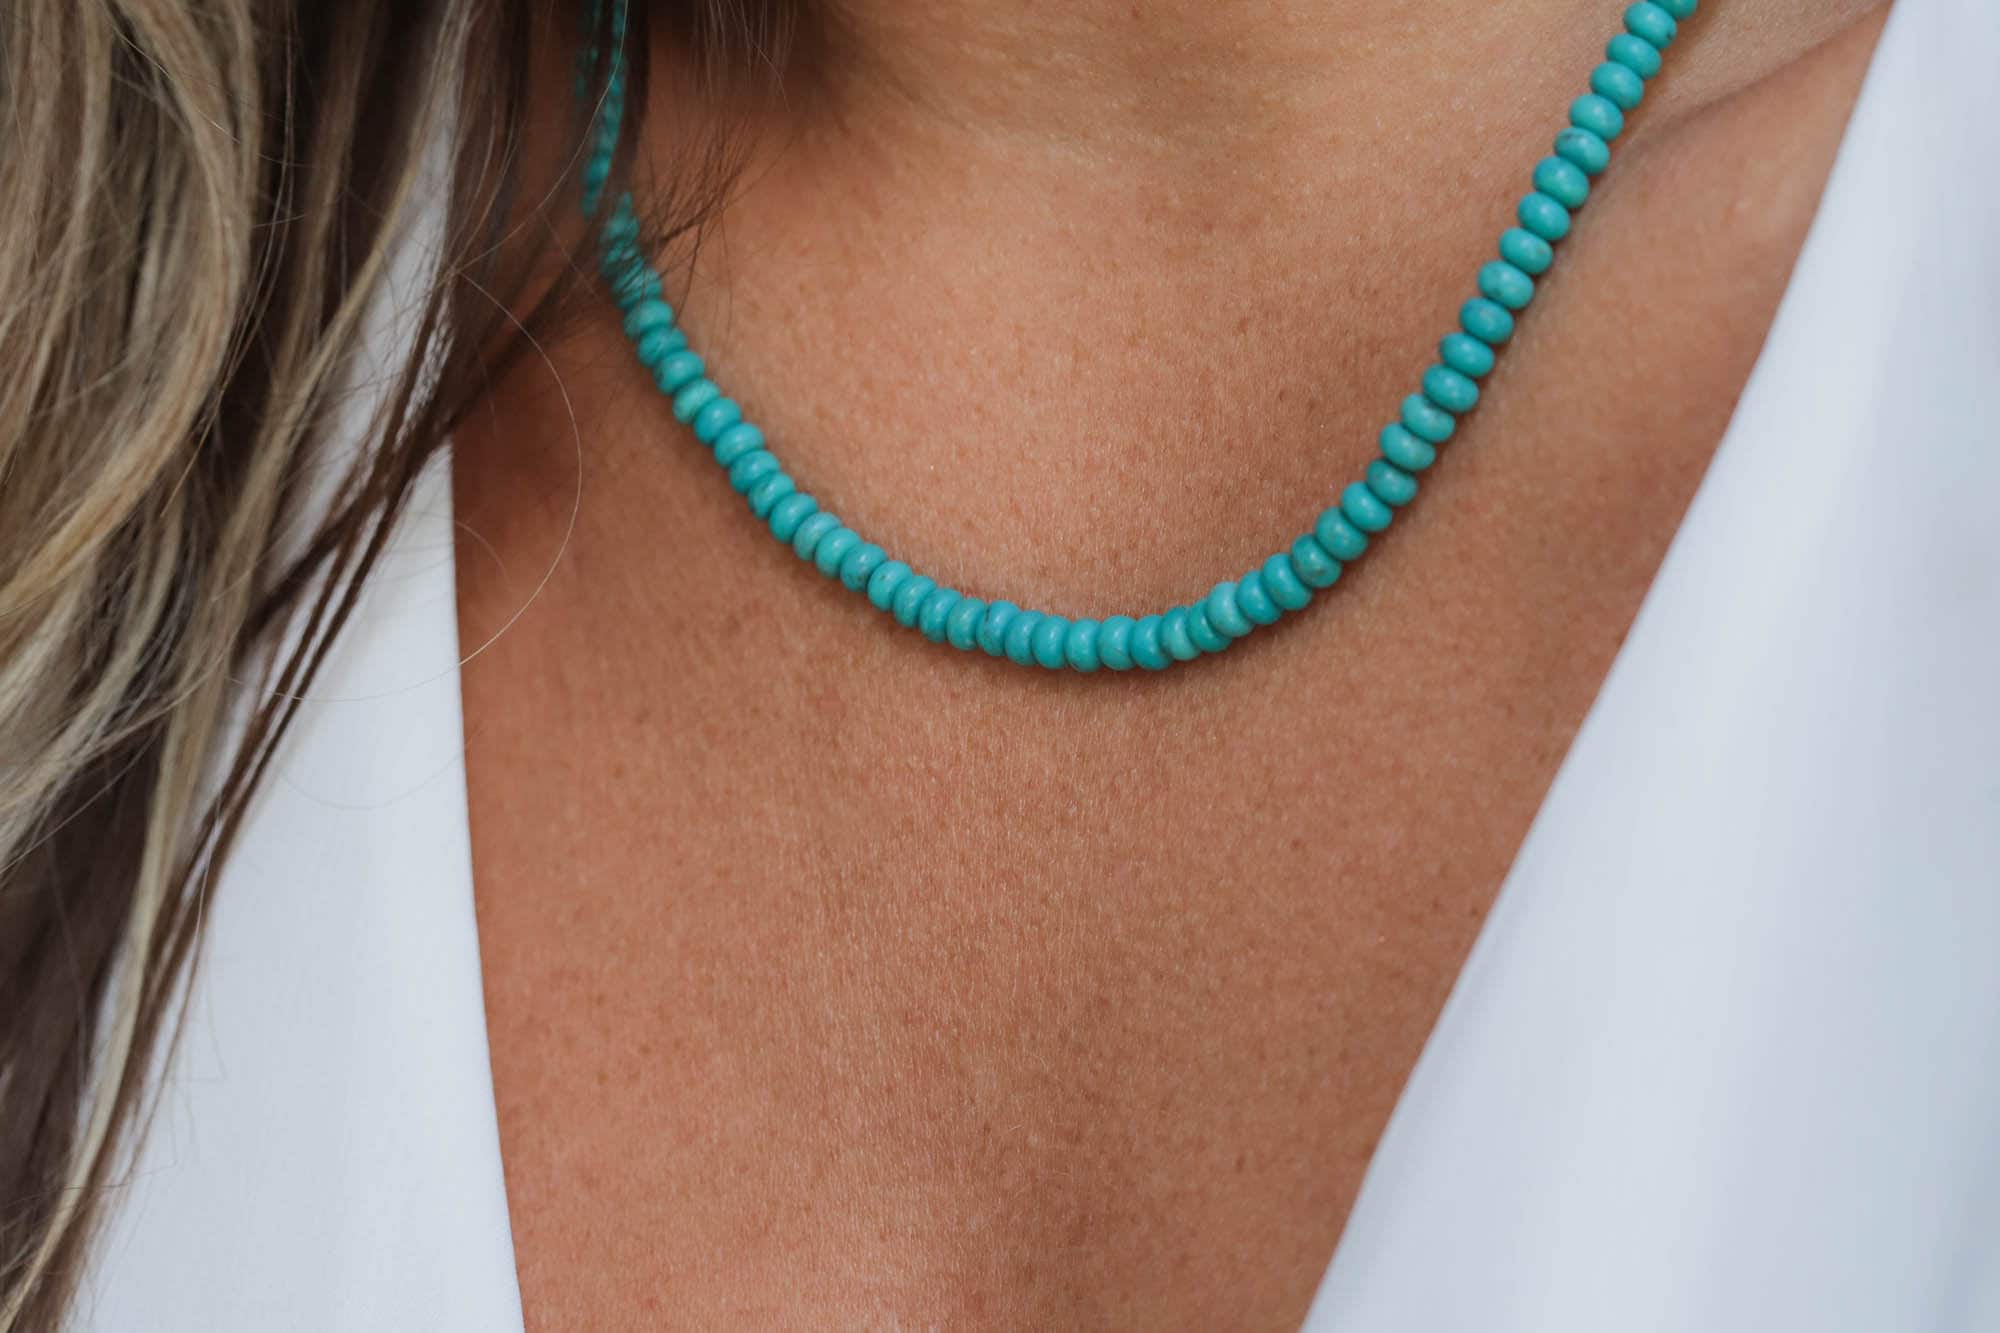 Turquoise Tire Beaded Necklace with Chocolate Silk Thread – Andrea Fohrman